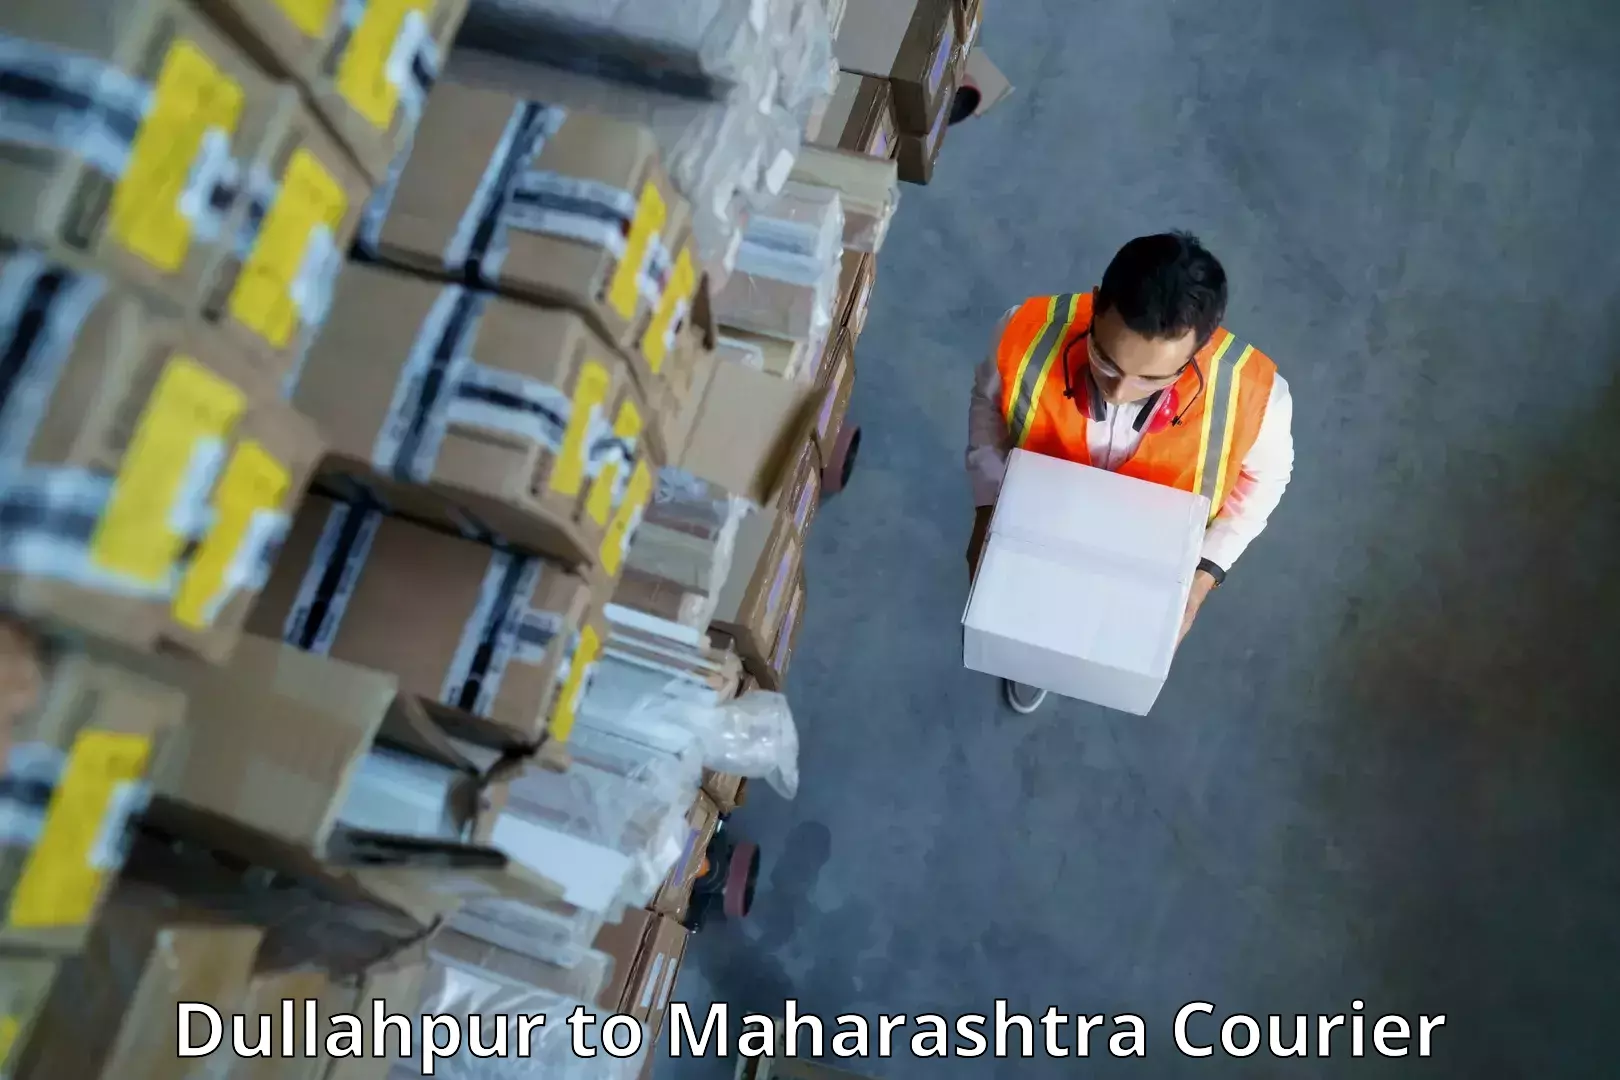 Heavyweight shipping in Dullahpur to Osmanabad